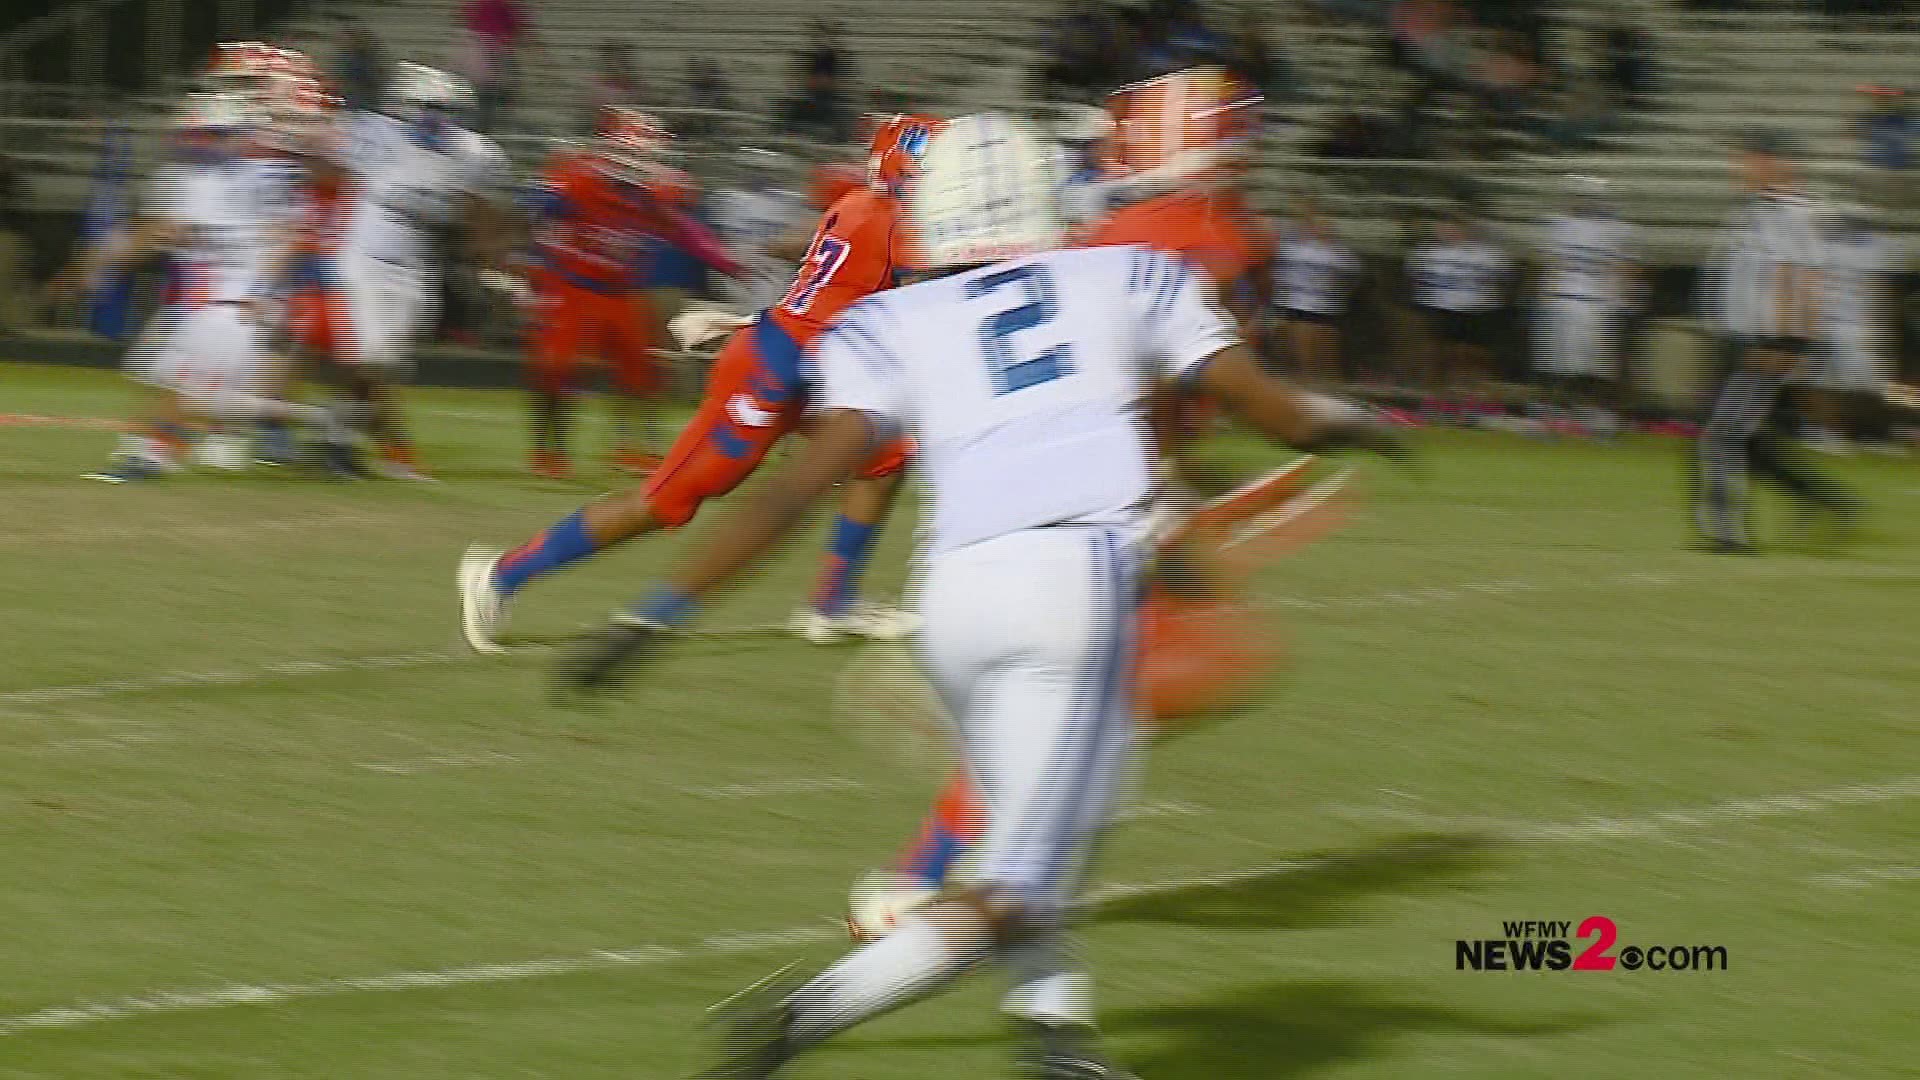 Highlights from Ragsdale High School's match-up with Glenn